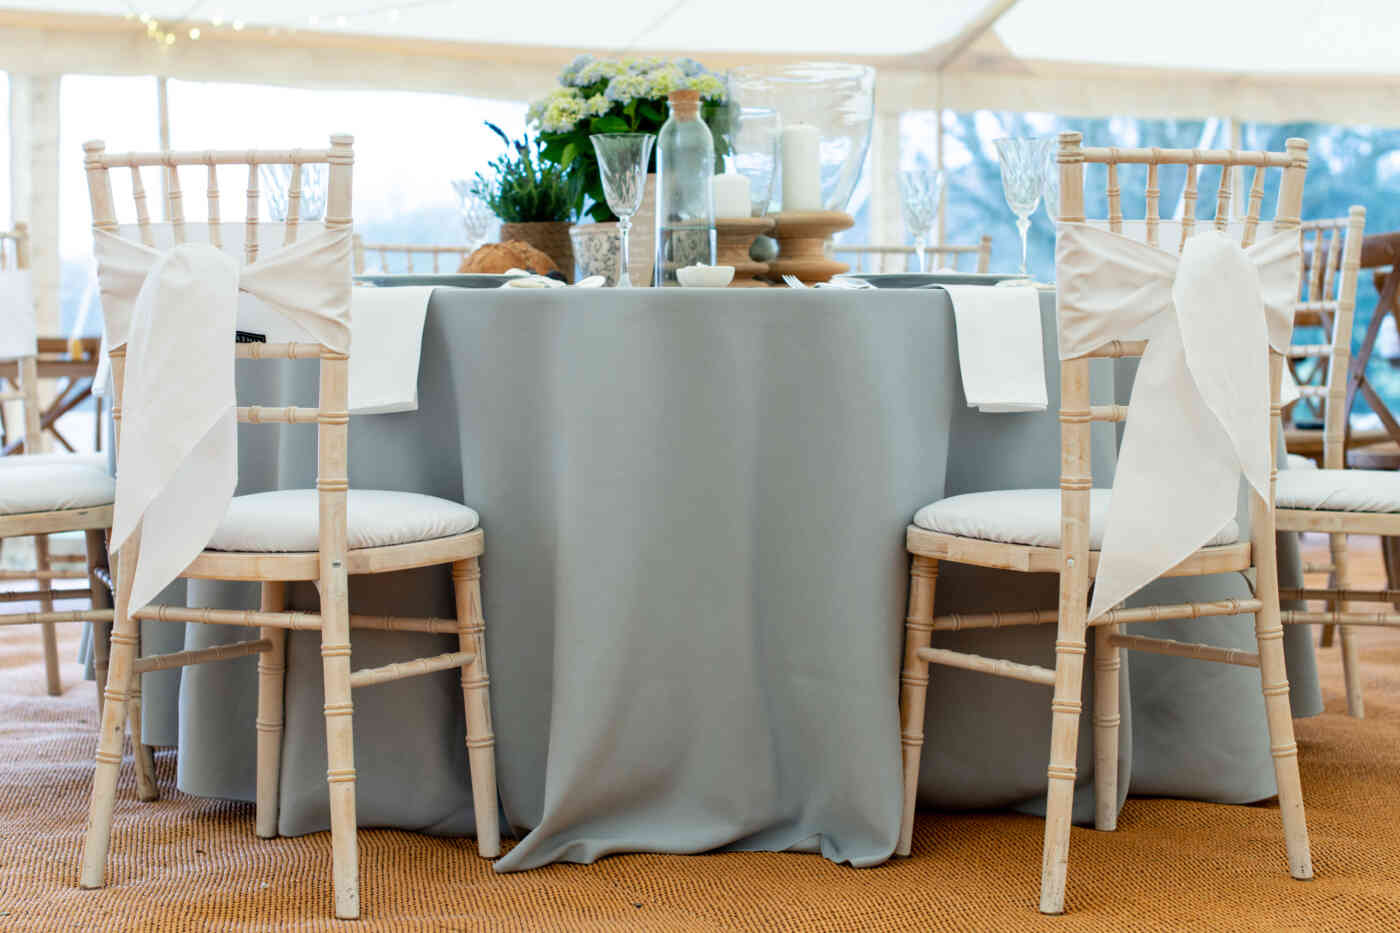 Tablecloth Size Guide Table Linen Hire, What Size Table Runner For 6 Chair